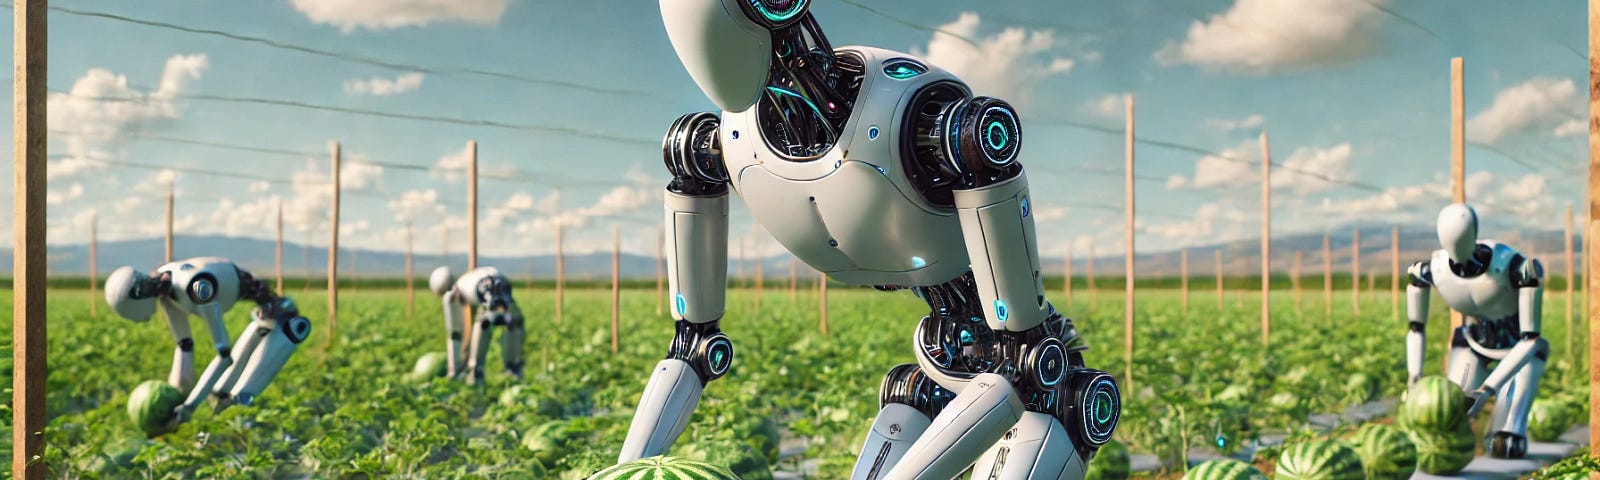 A humanoid robot bending to lift a heavy watermelon in a field. The harvest scene conveys the idea that humanoids can relieve humans of physically demanding work.